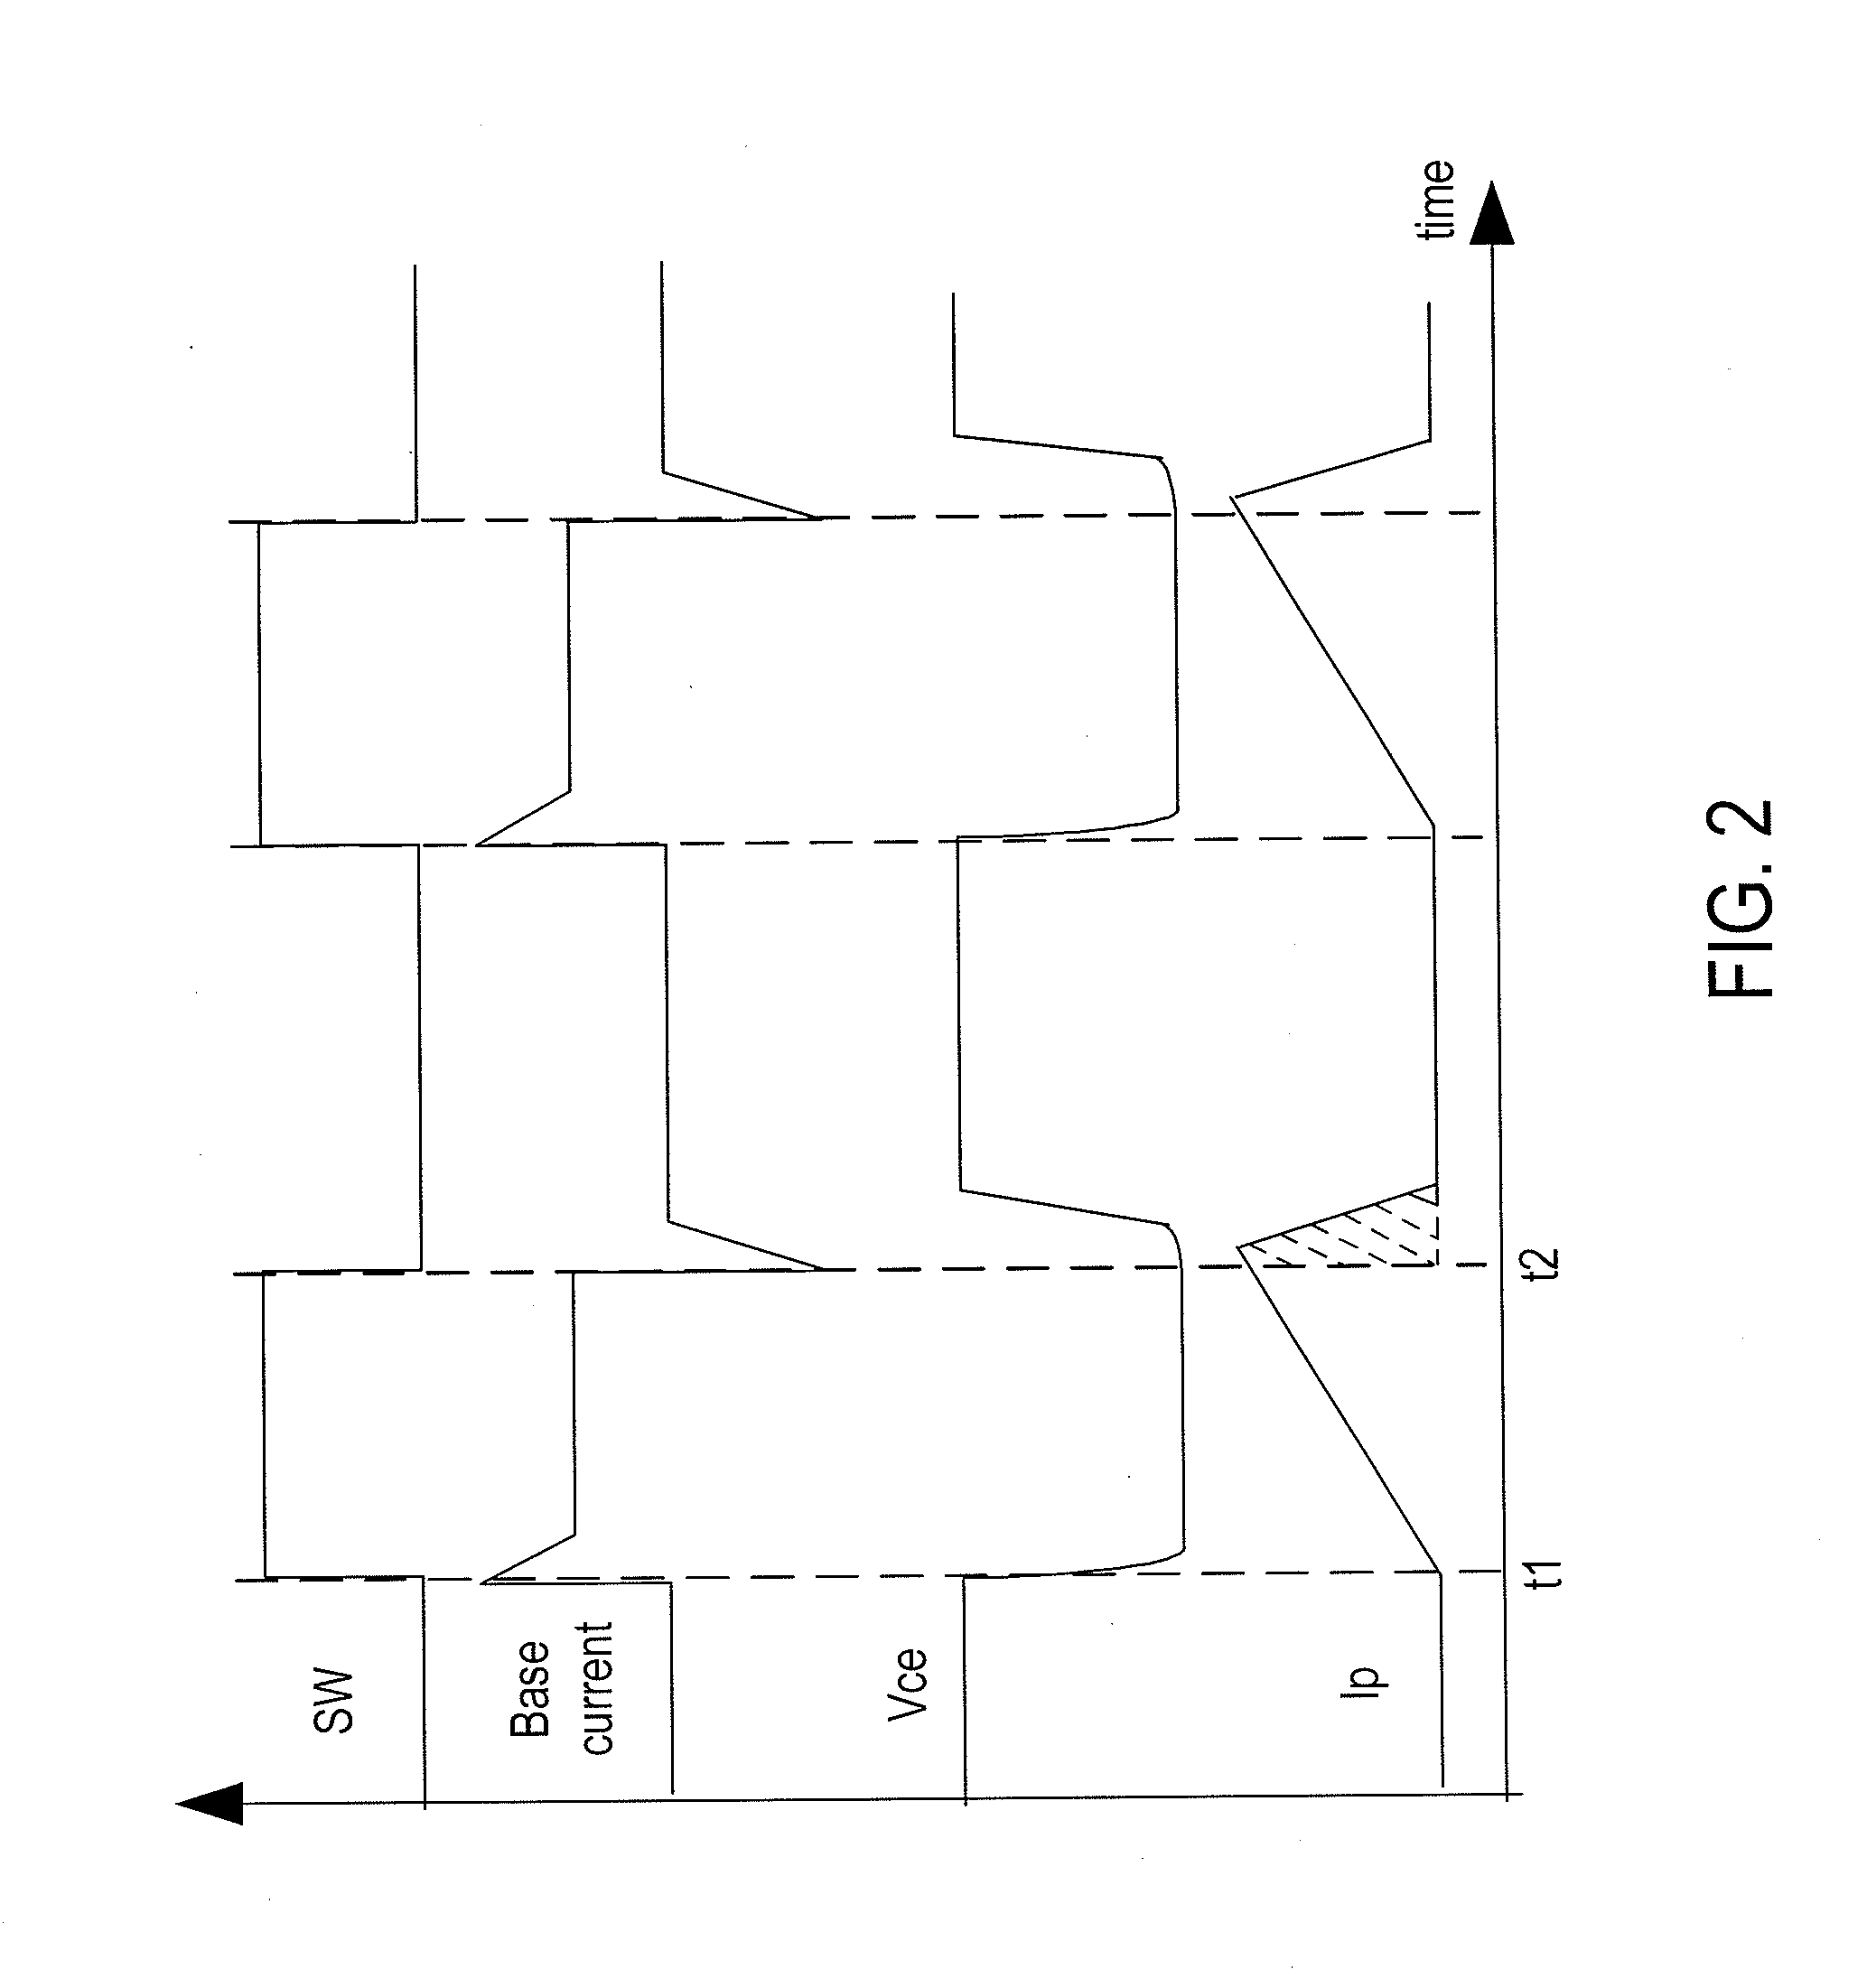 Power transistor driving circuits and methods for switching mode power supplies